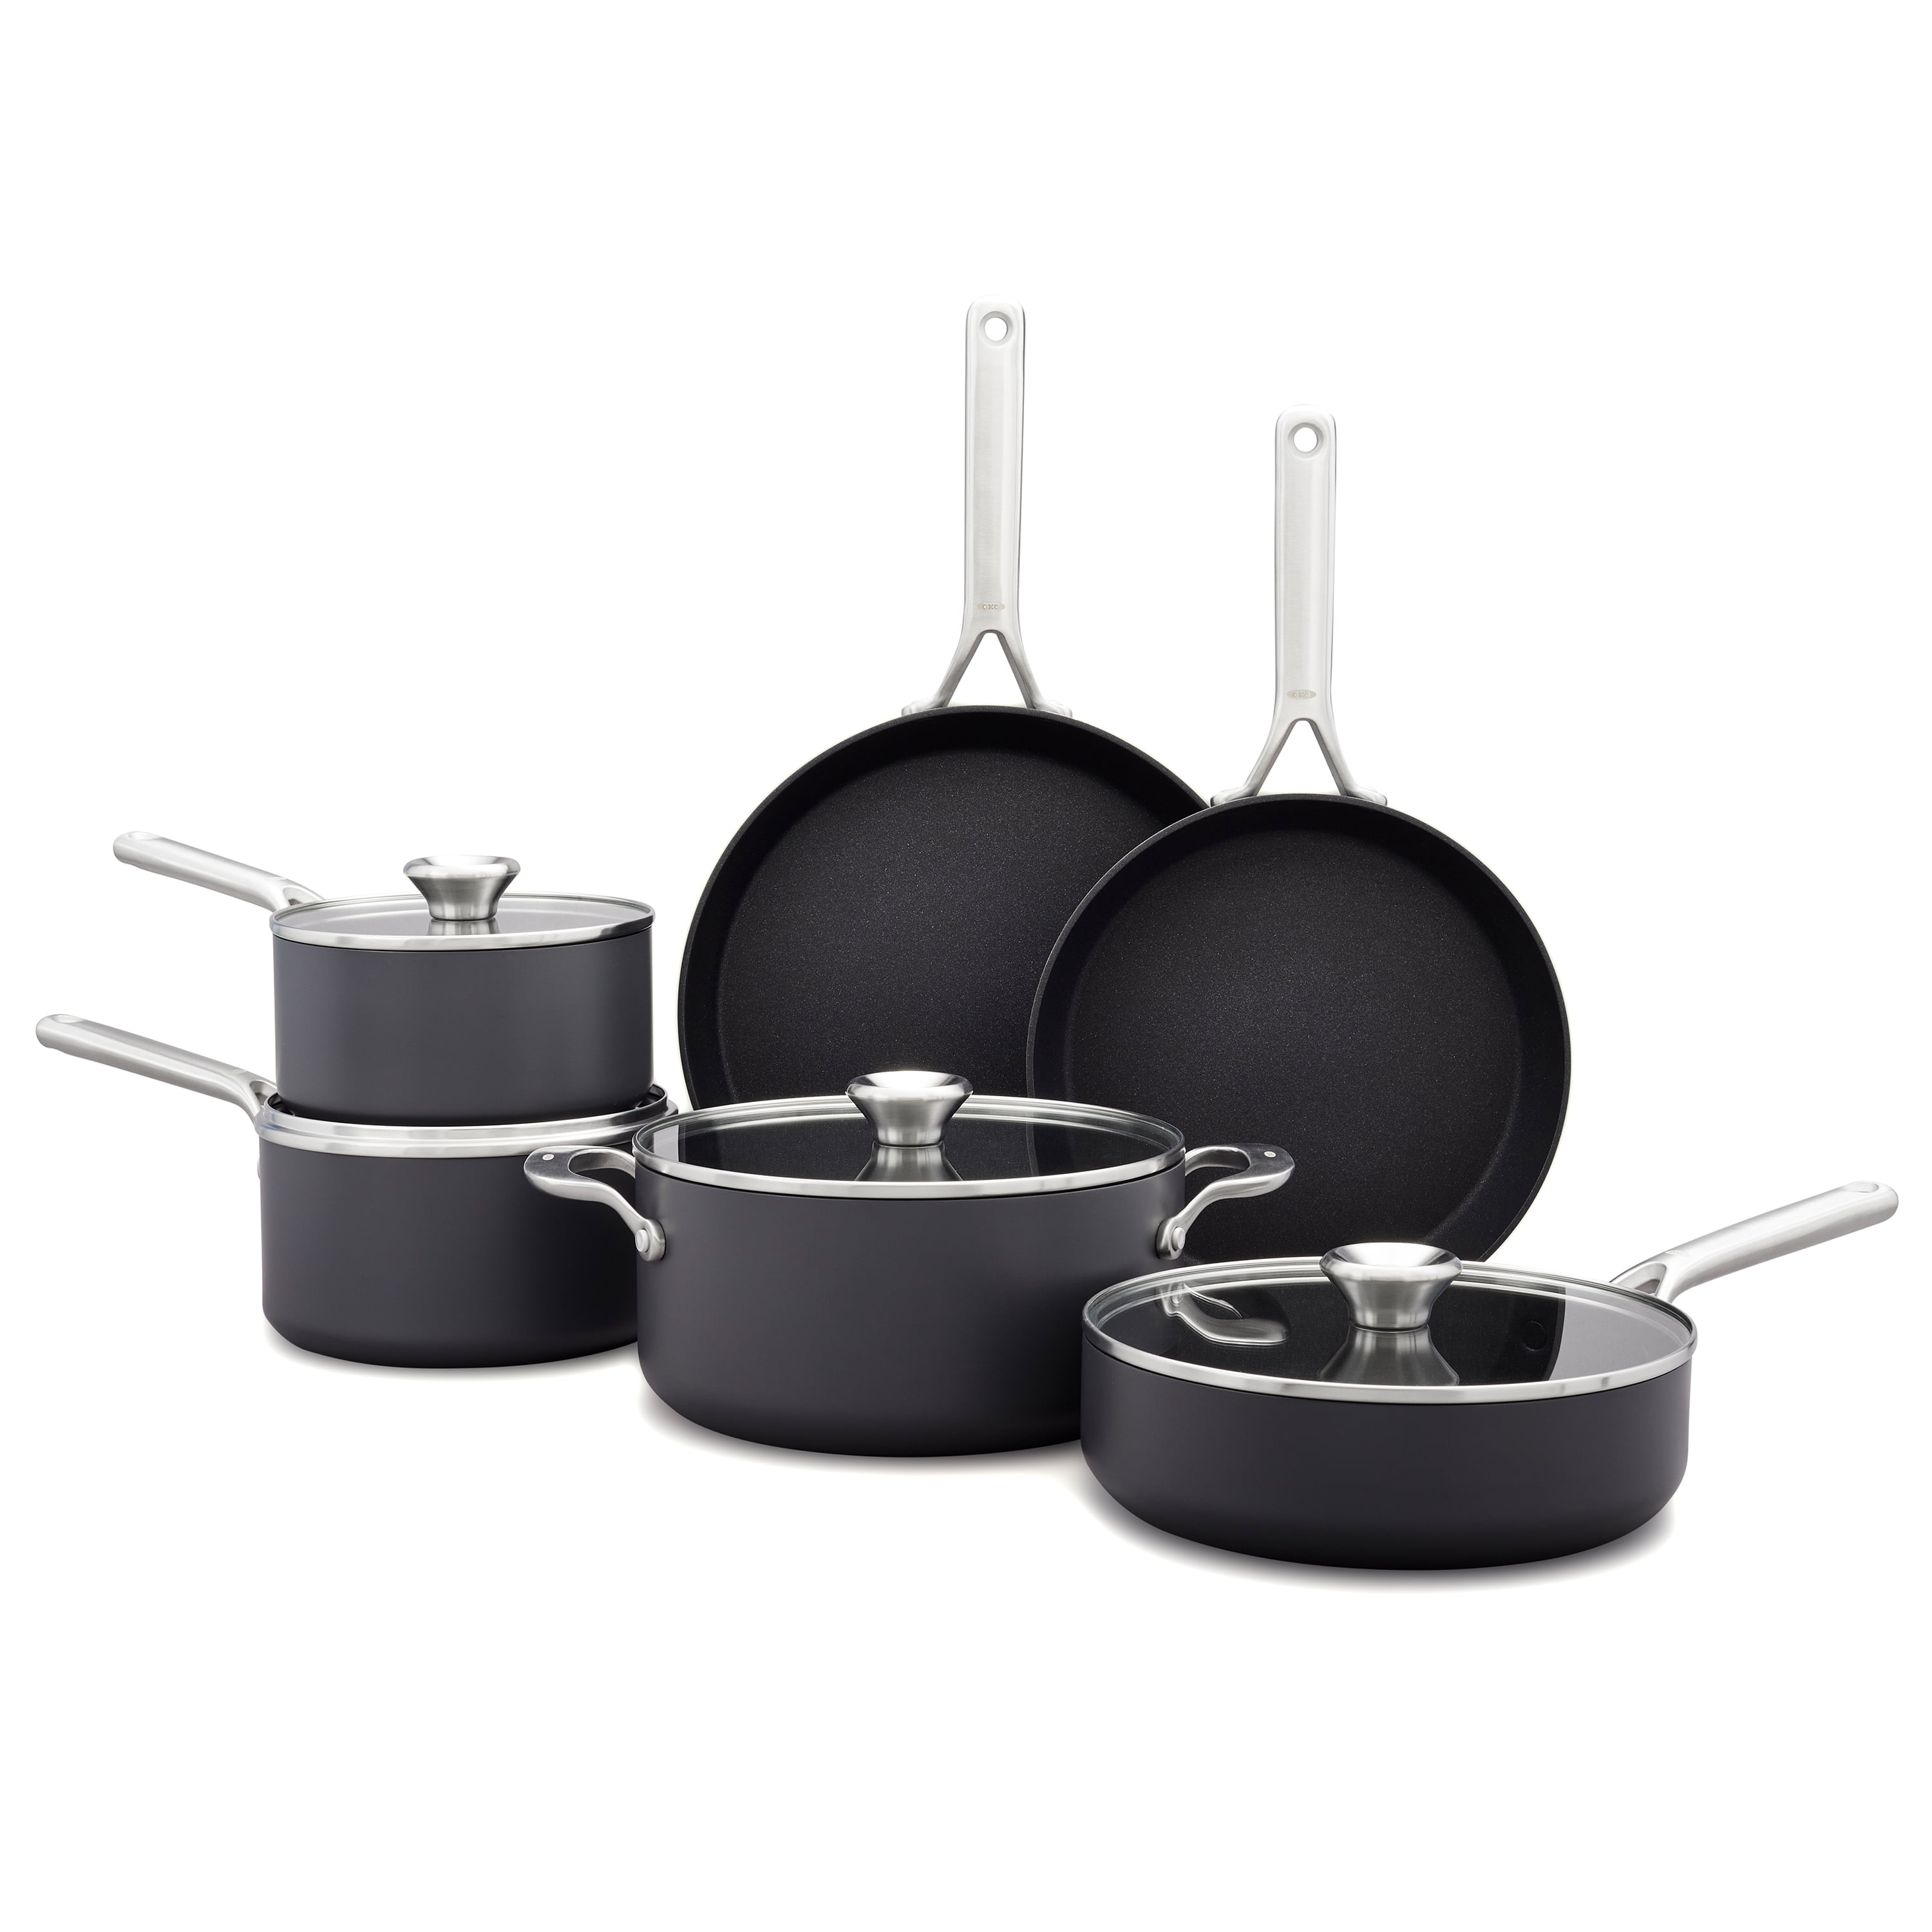 As Is Cook's Essentials Hard Anodized 10-Piece Cookware Set